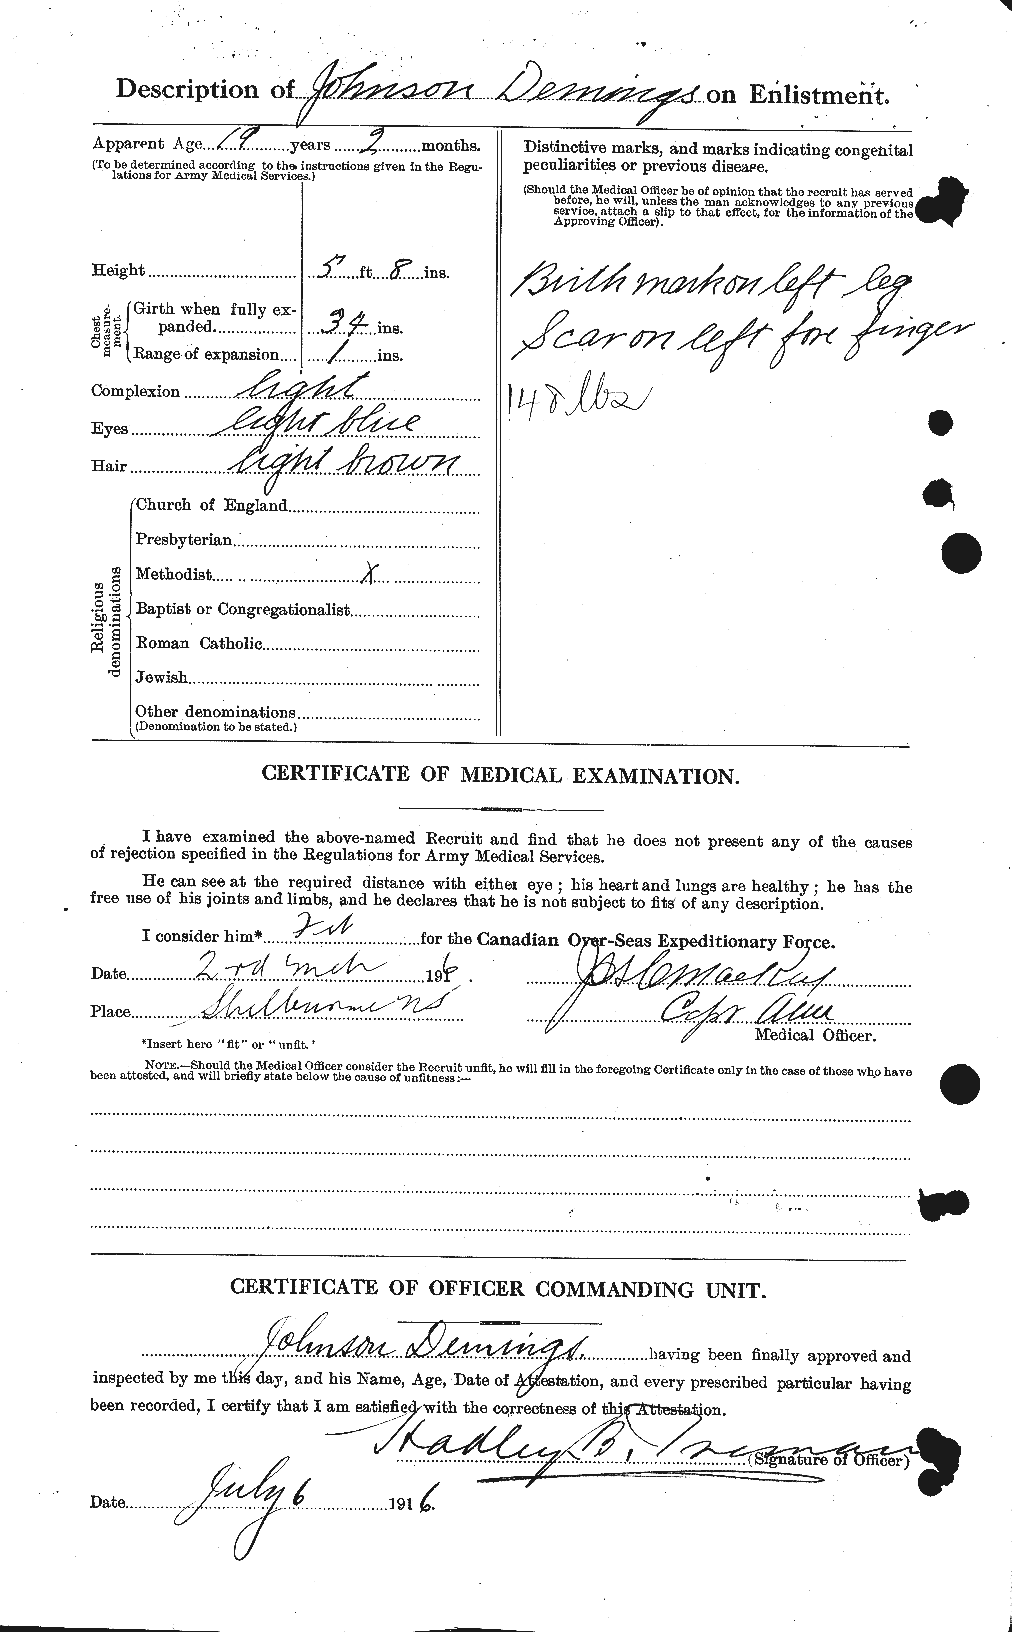 Personnel Records of the First World War - CEF 286772b